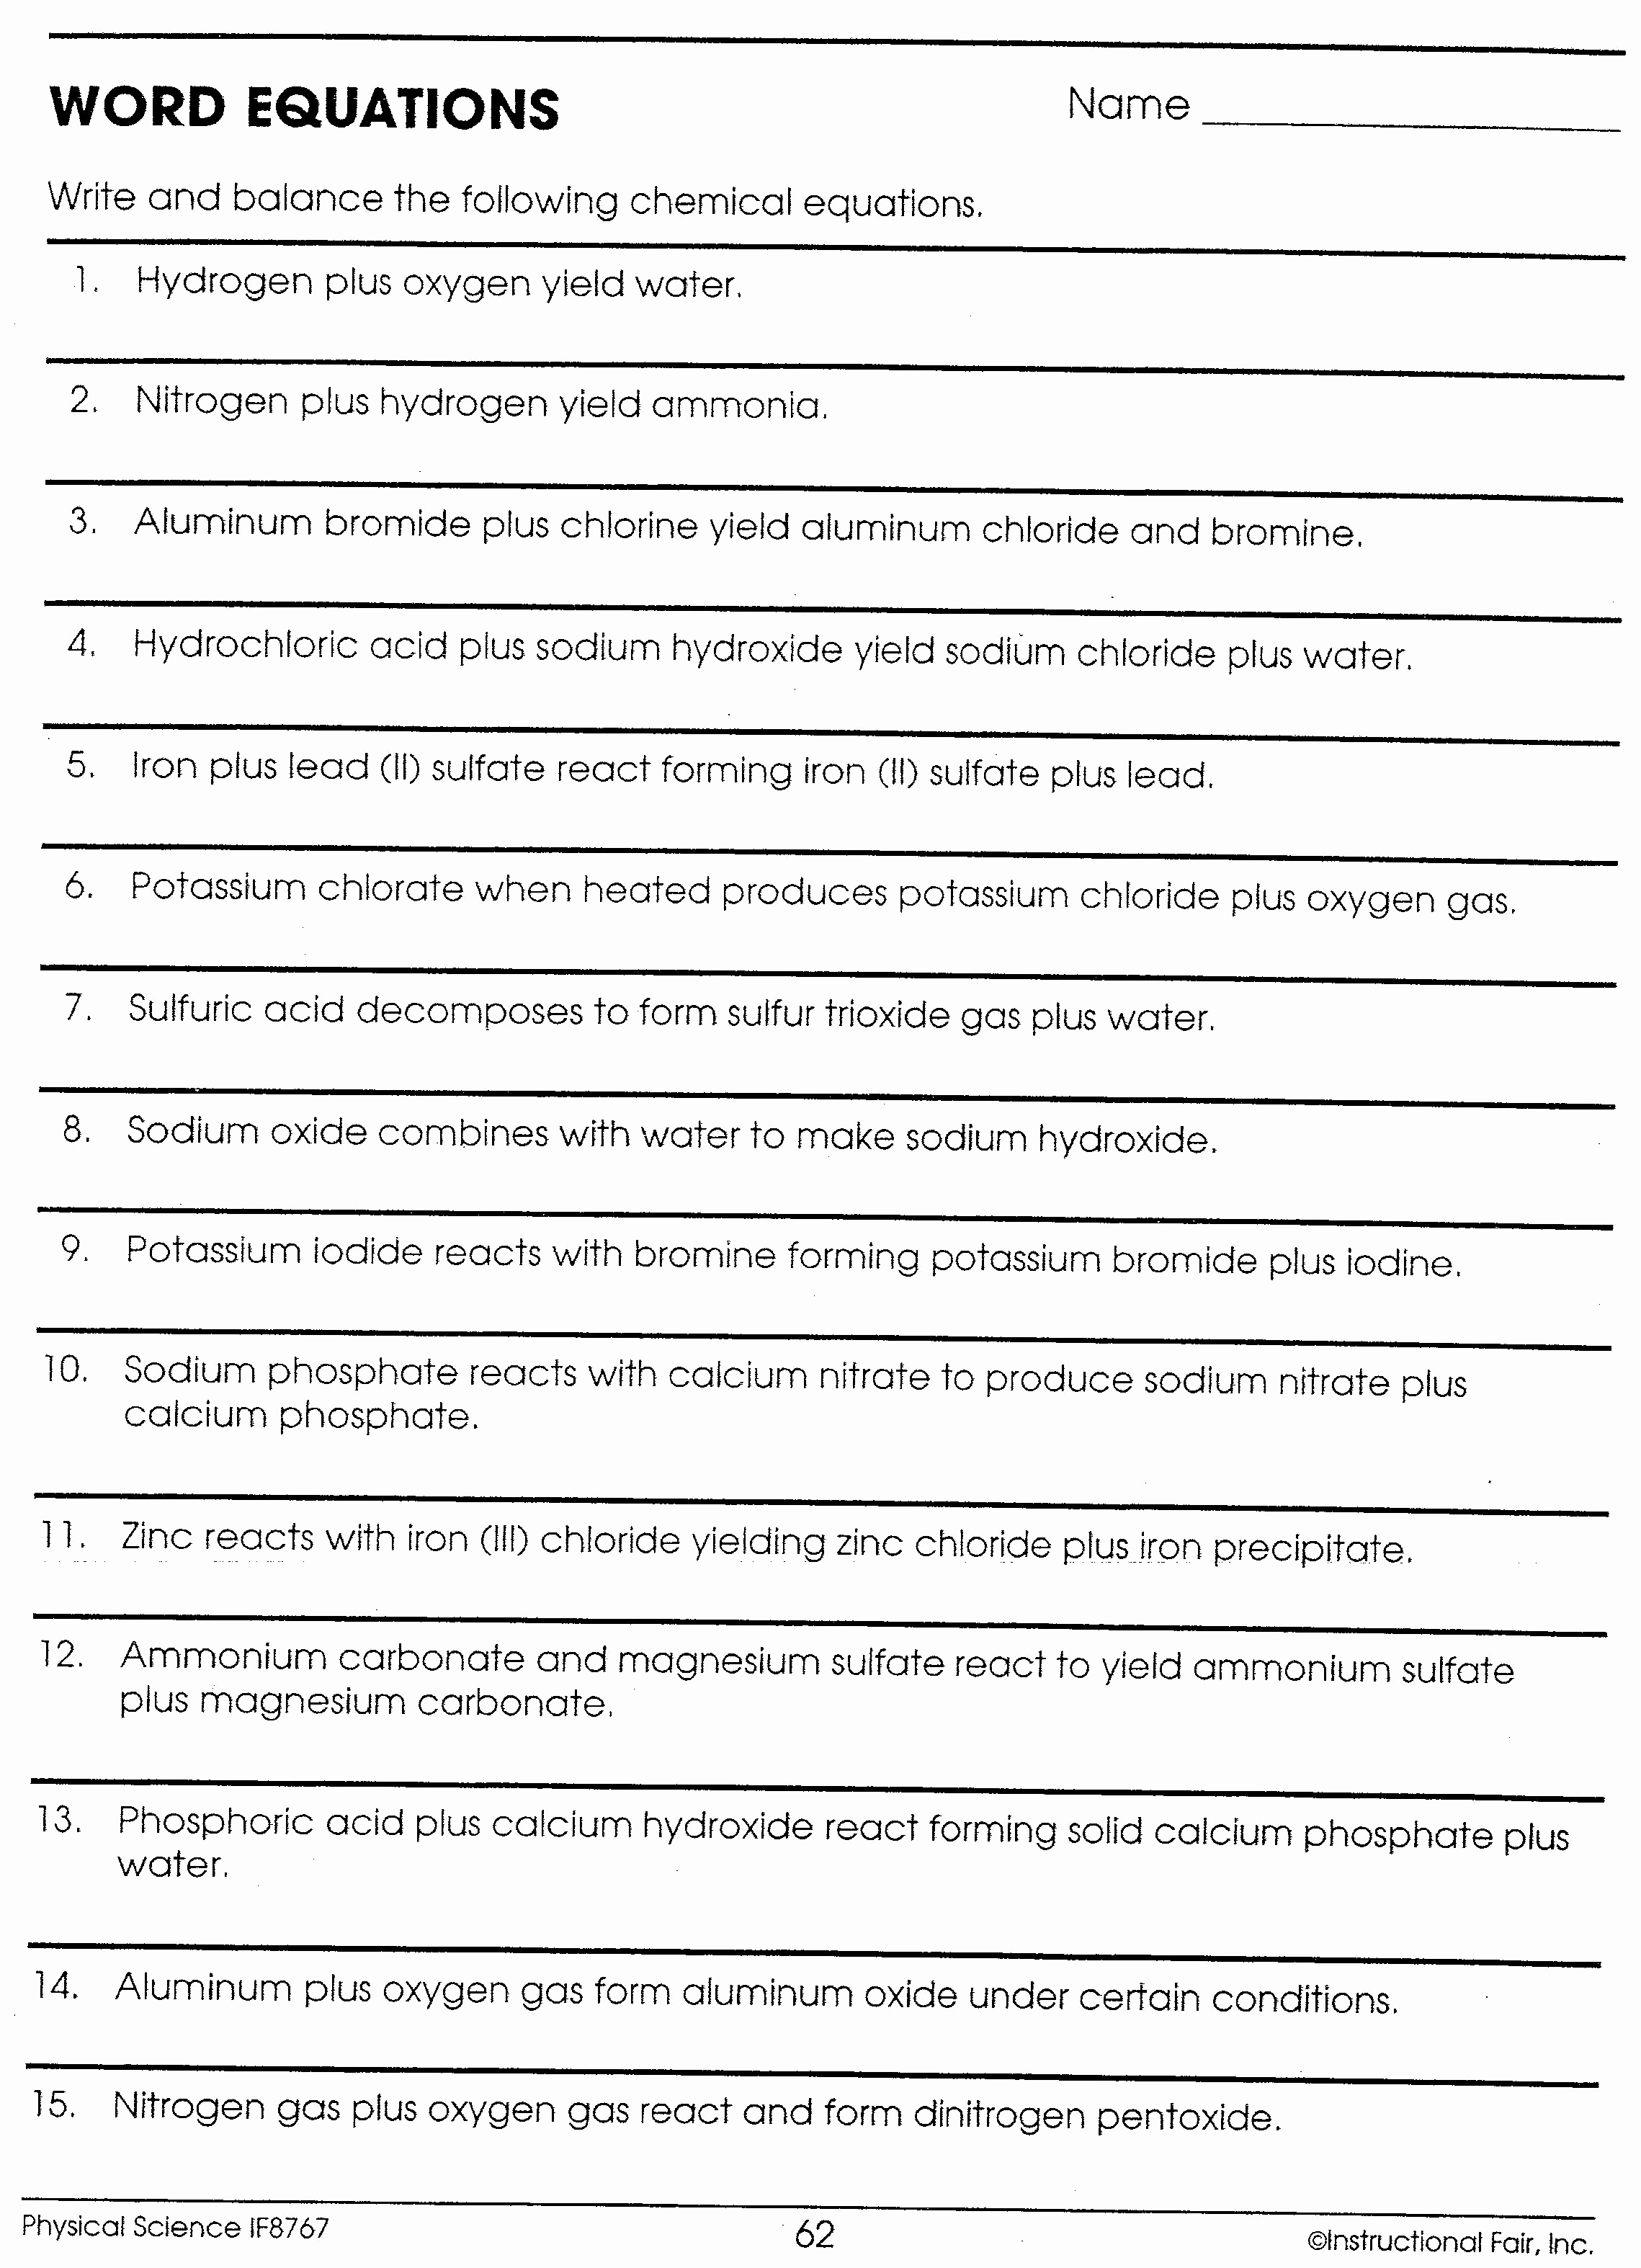 Word Equations Worksheet Answers If8766